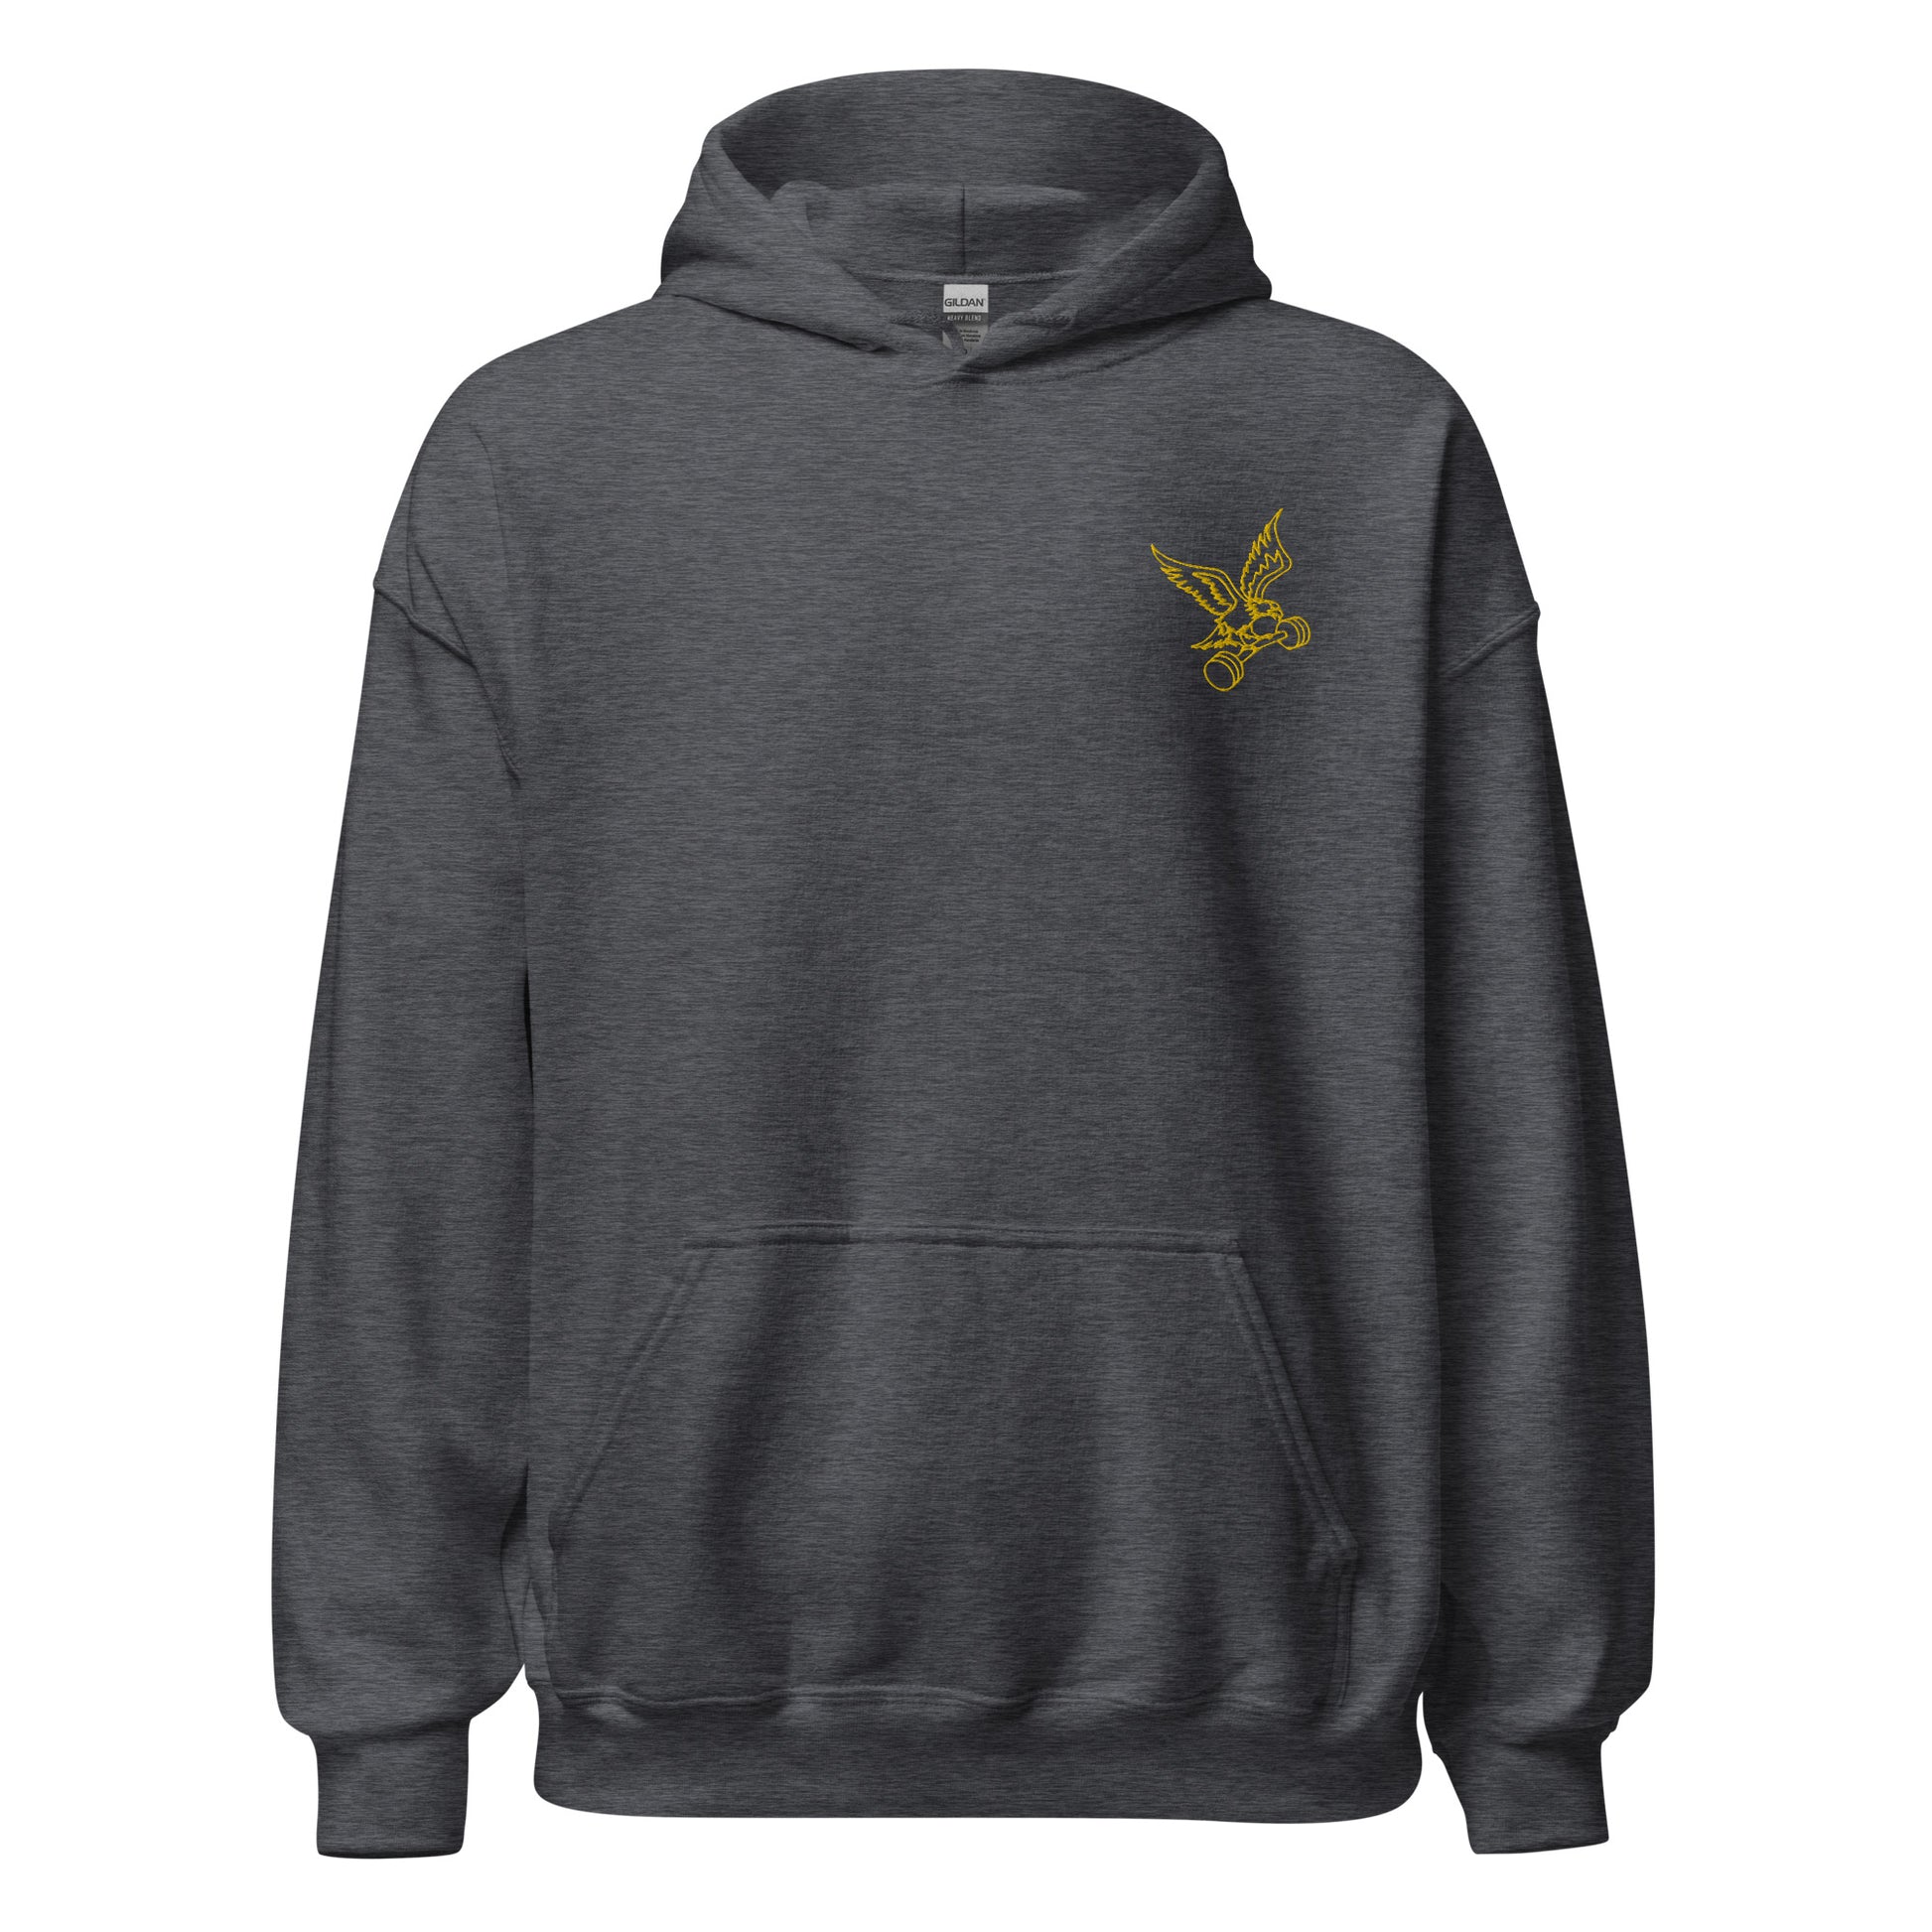 Embroidered Barbell Eagle Hoodie in Dark Heather